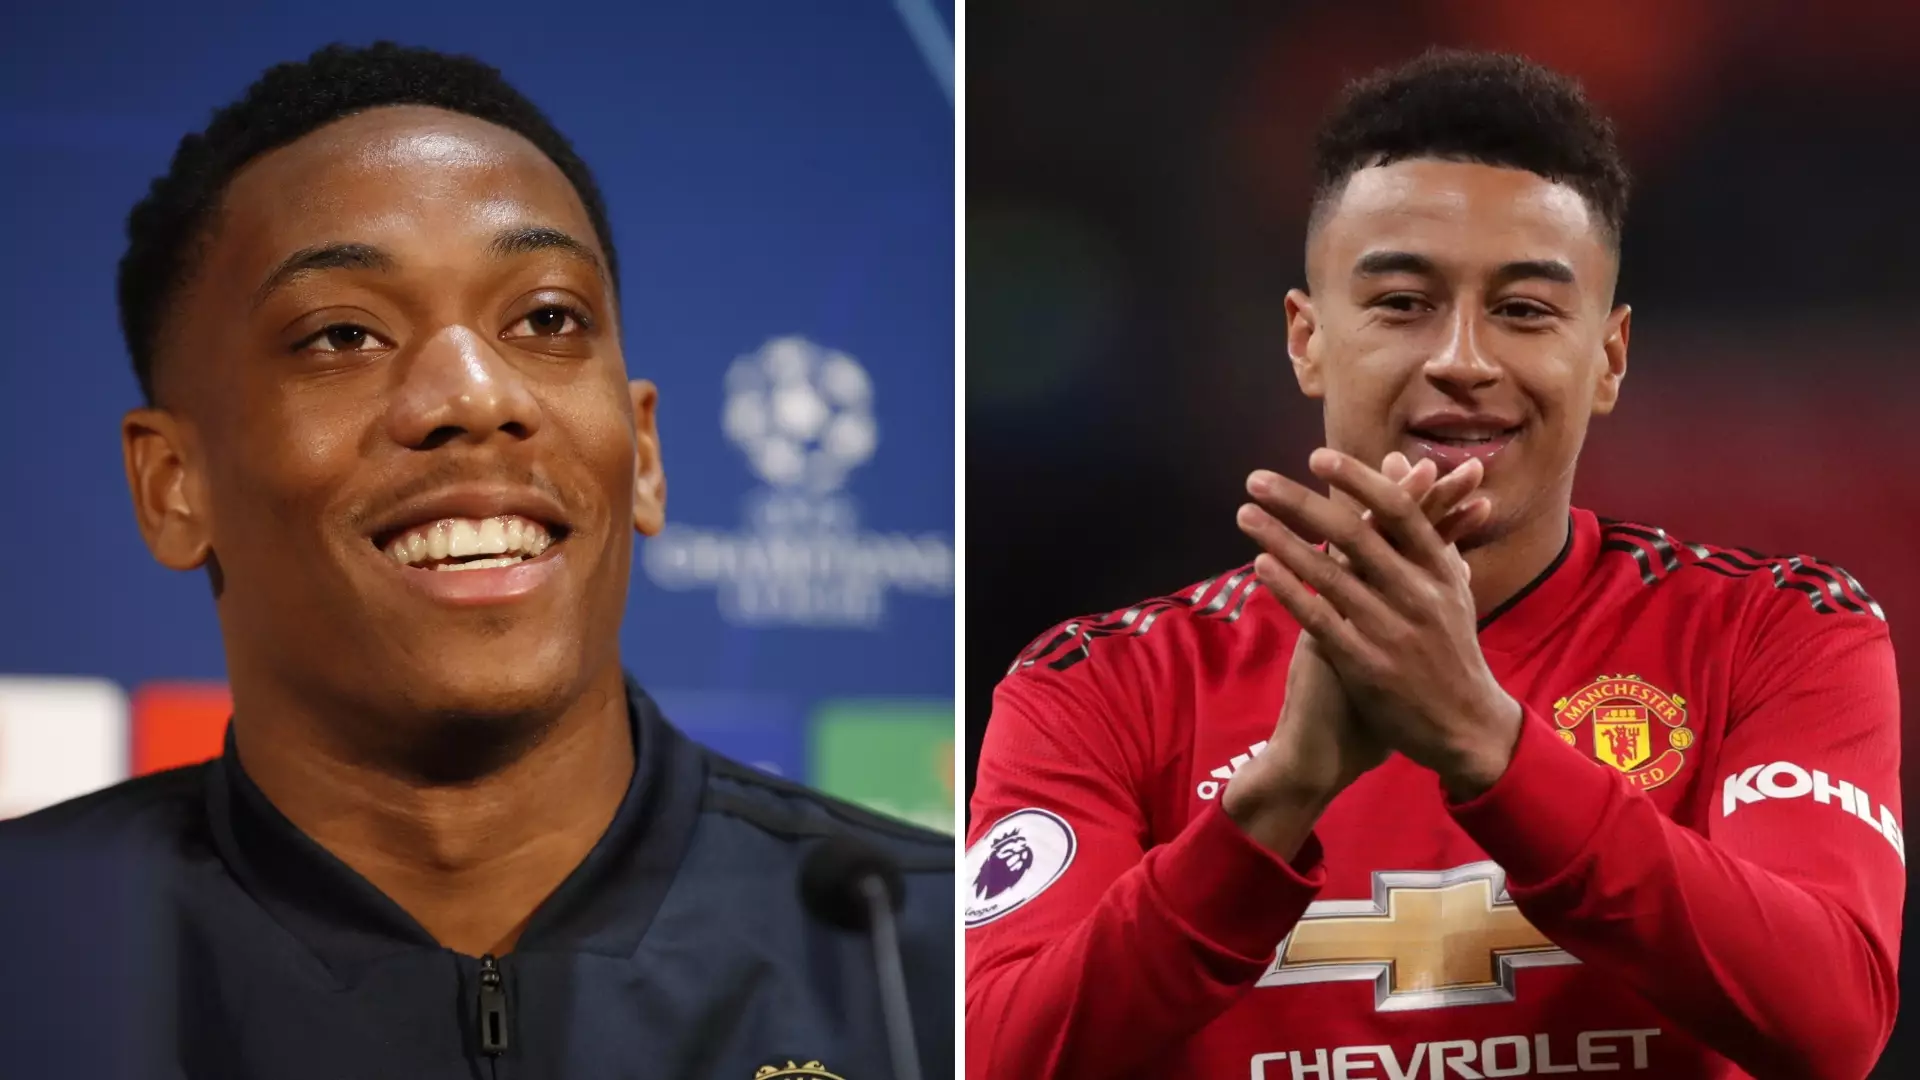 Paul Ince Slated ‘Diabolical’ Jesse Lingard And Called Anthony Martial A ‘Fizzy Drink’